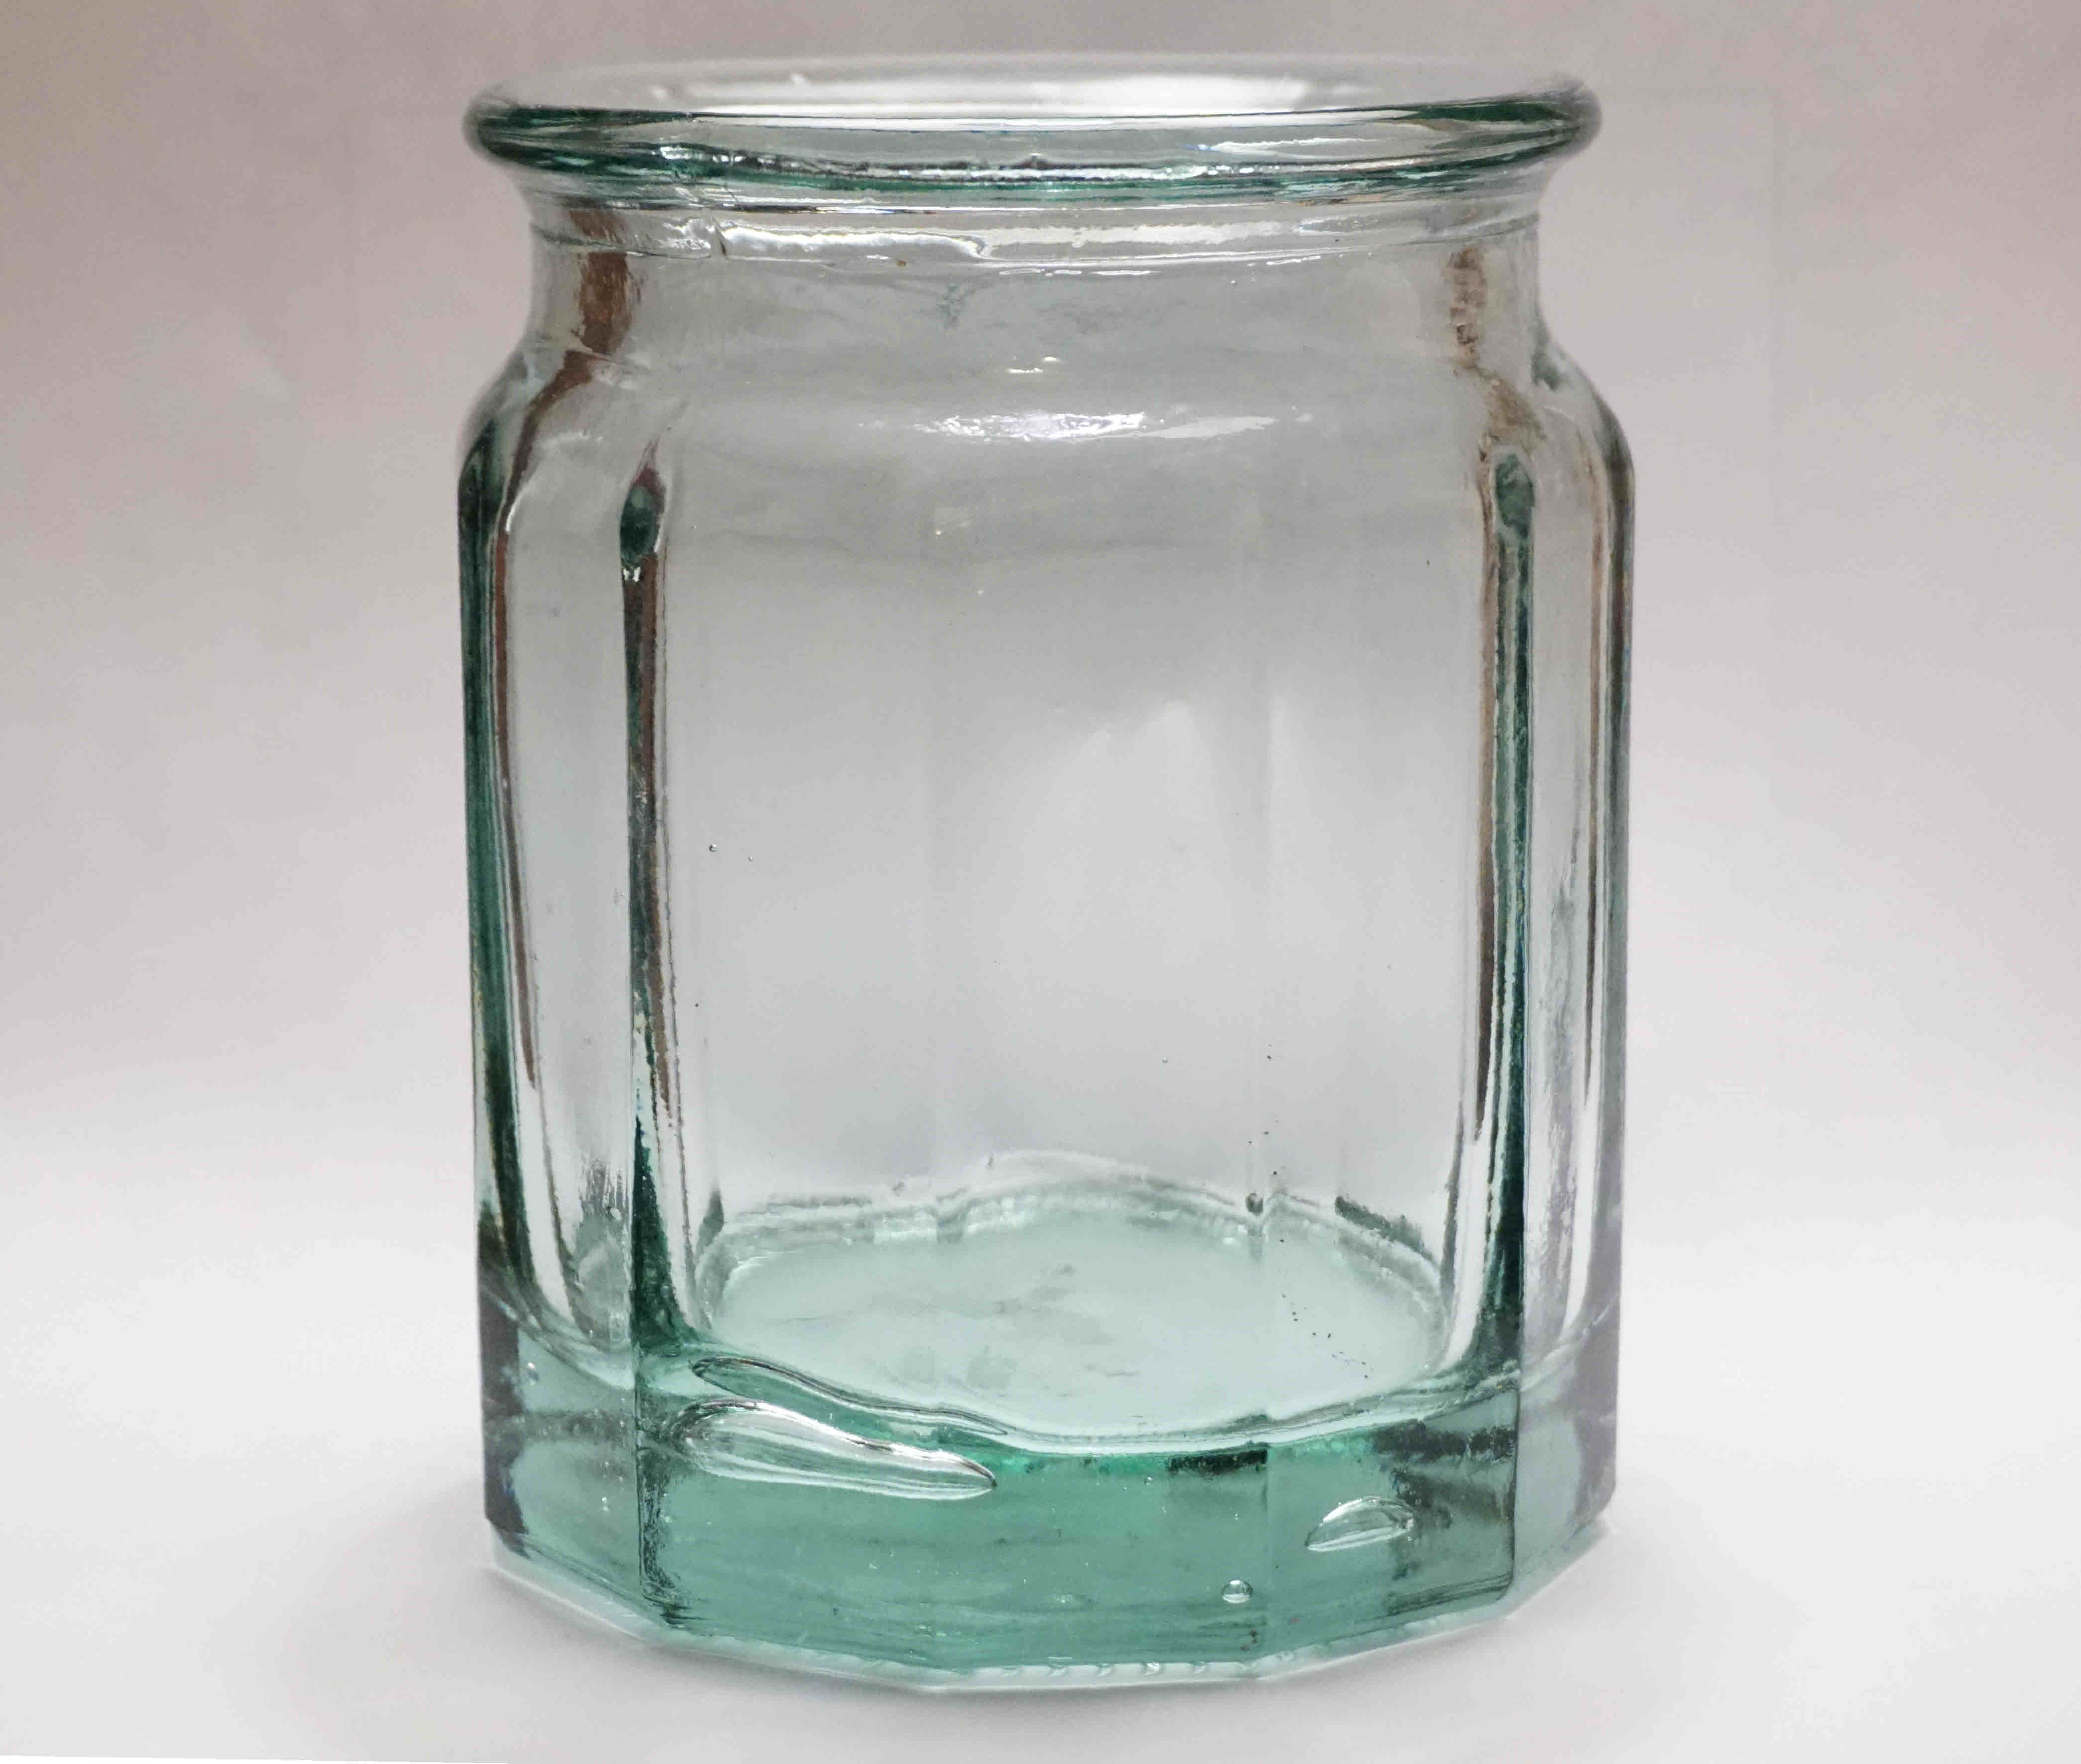 File:Soda-lime glass jar showing bubbles trapped within.jpg ...